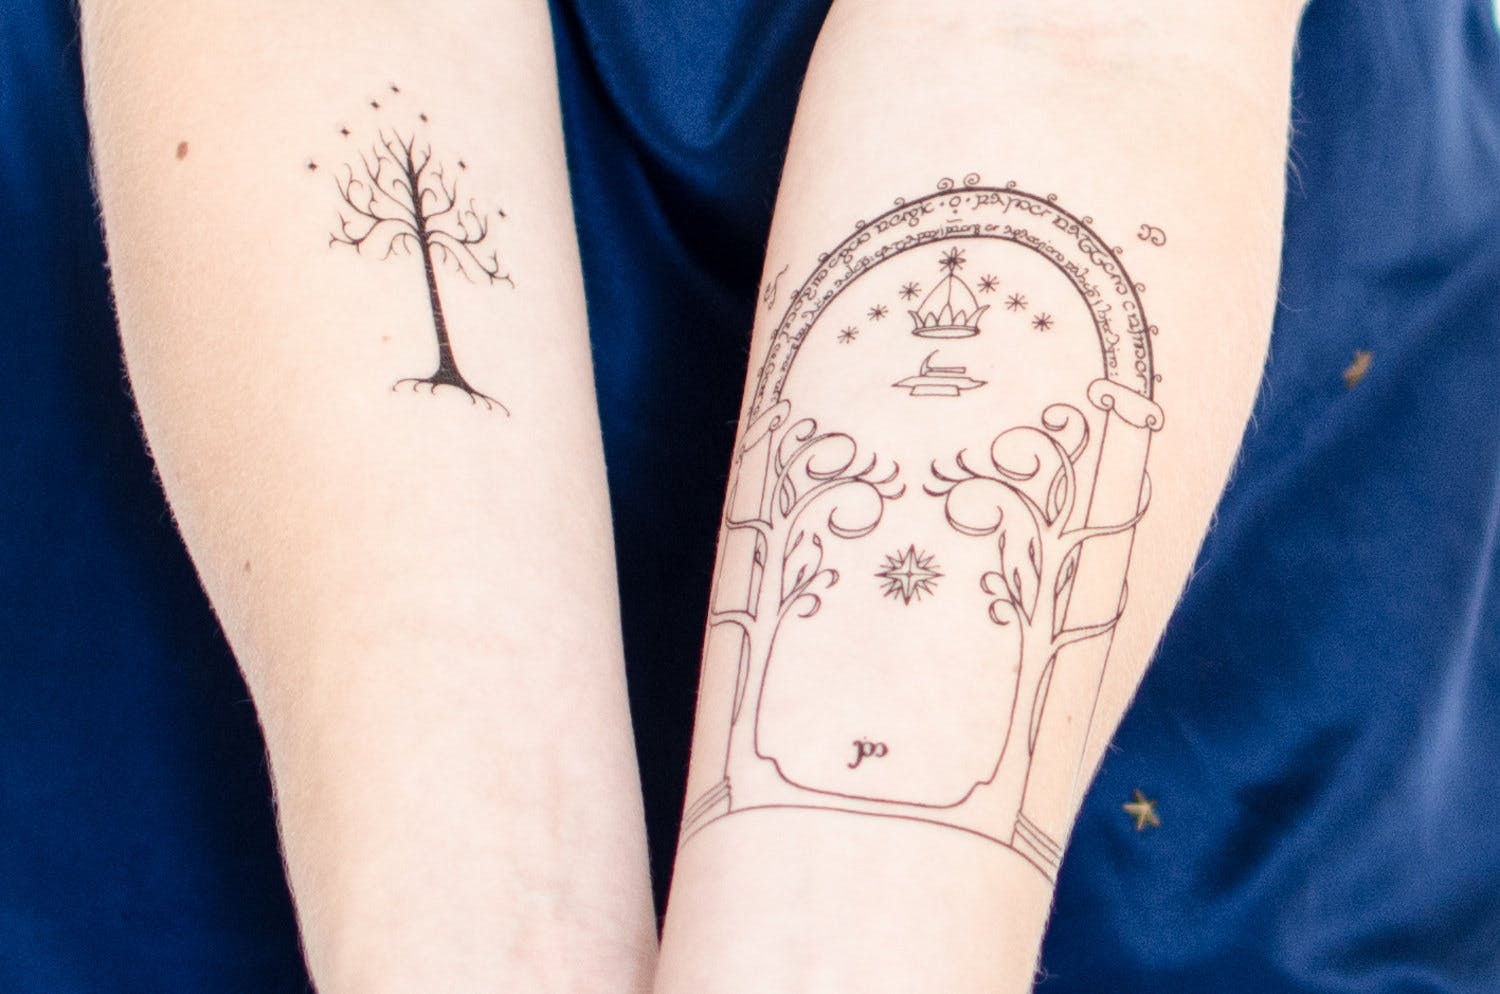 Tree of Gondor and Durin's Door temporary tattoos.